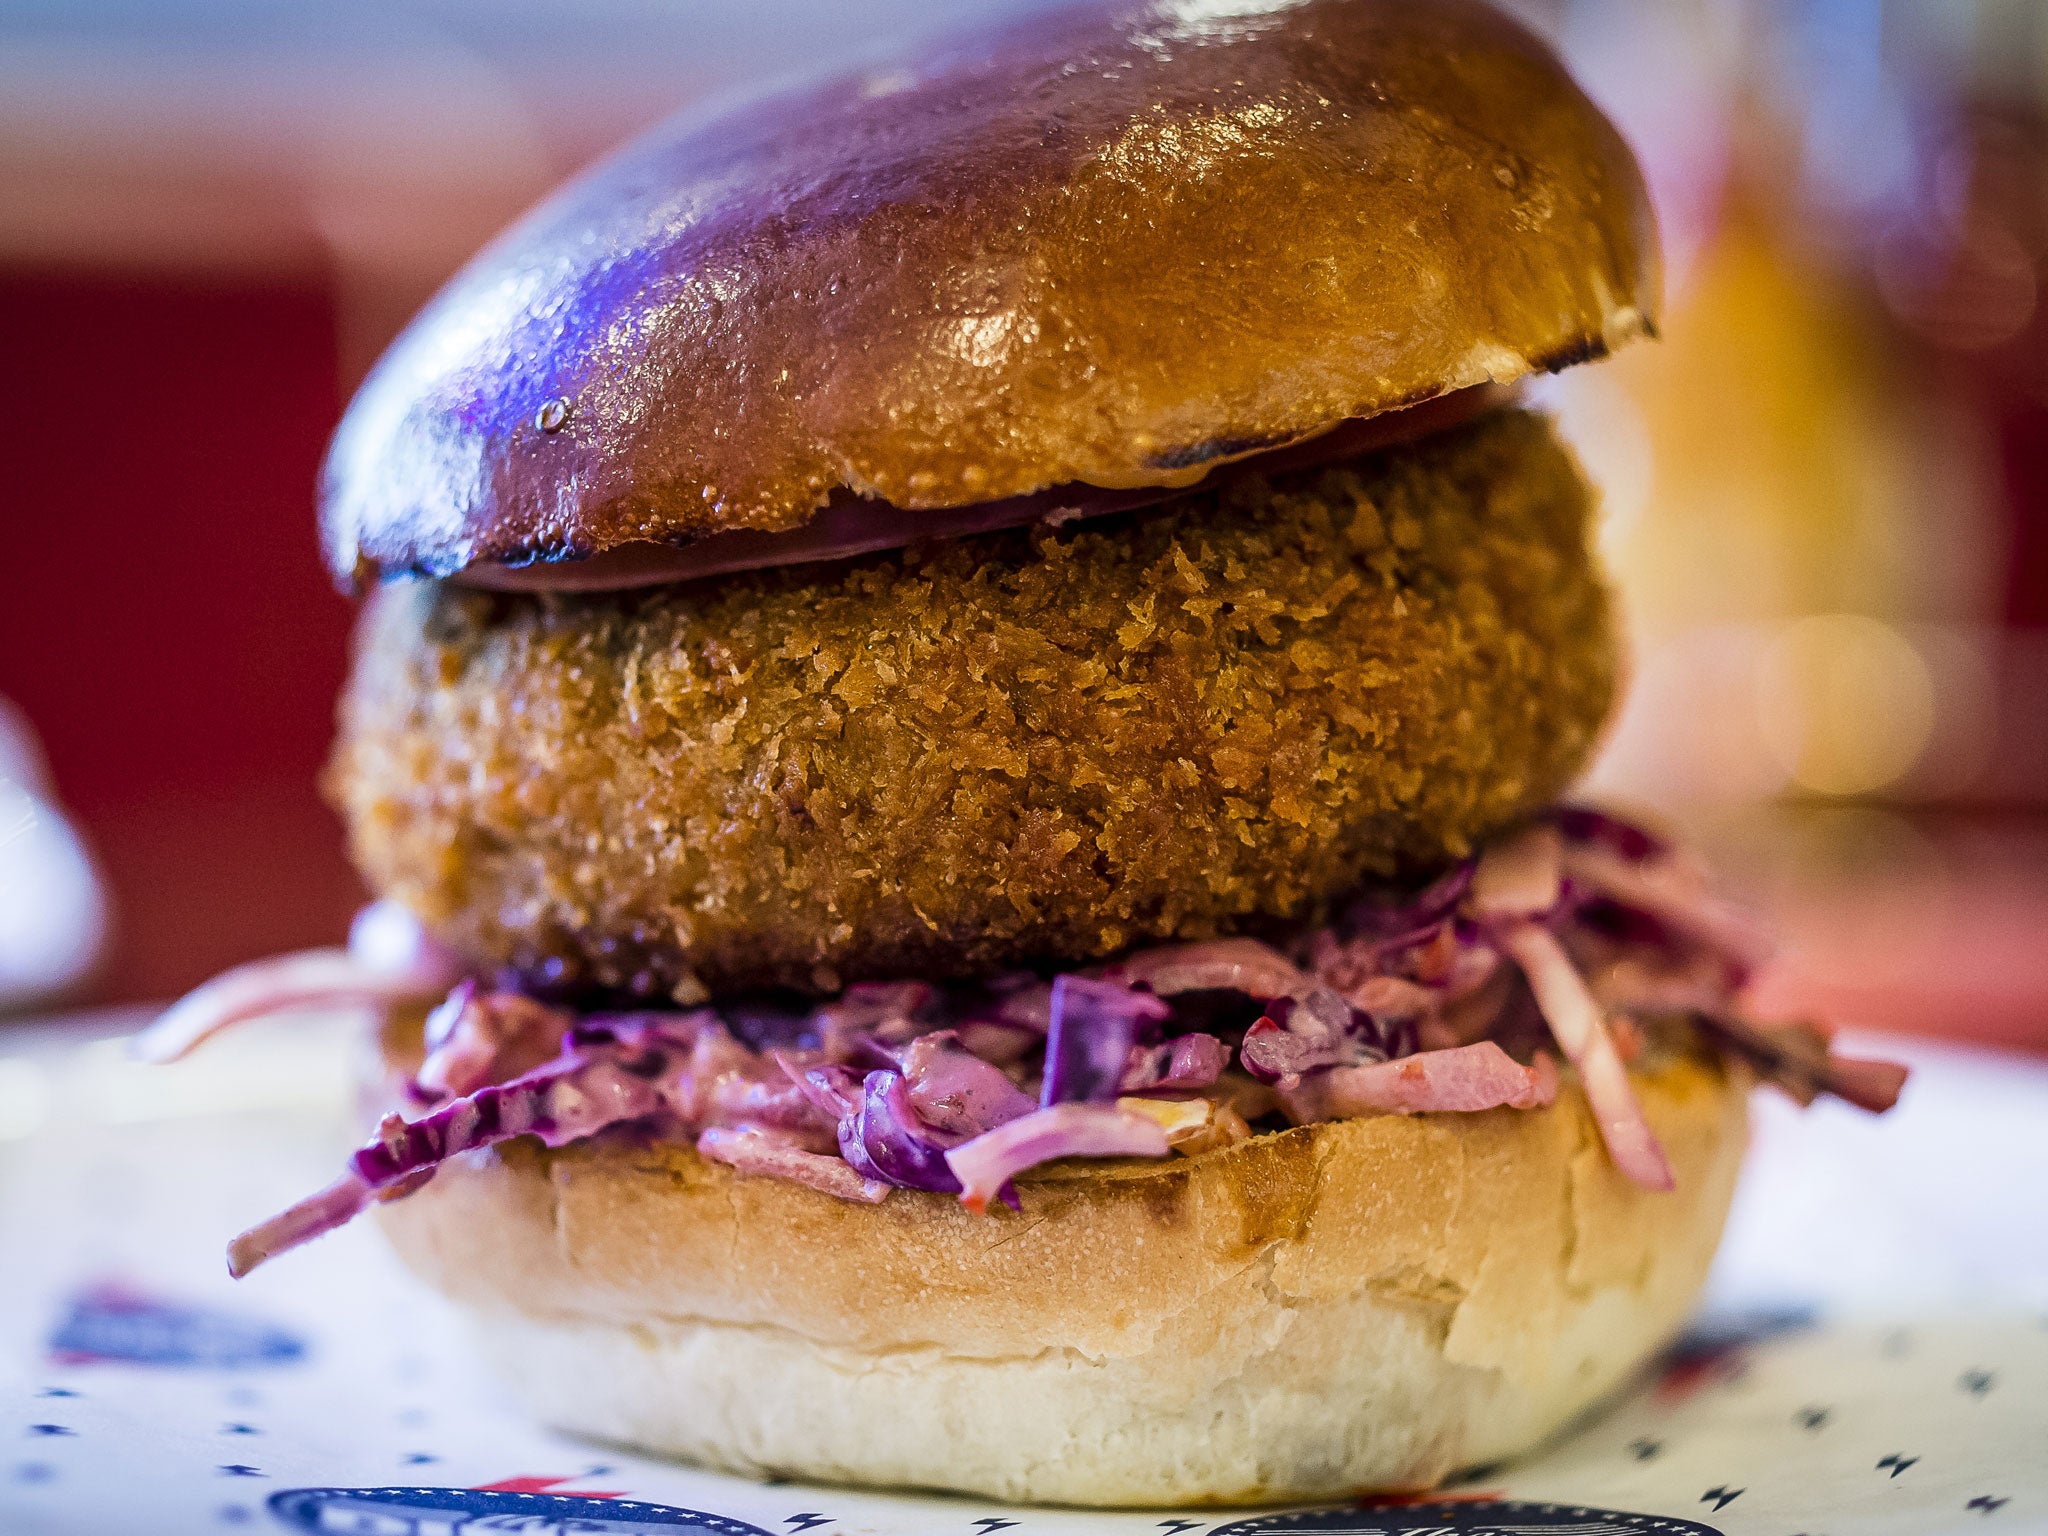 It might look a little like a veggie burger, but is in fact a pulled pork patty